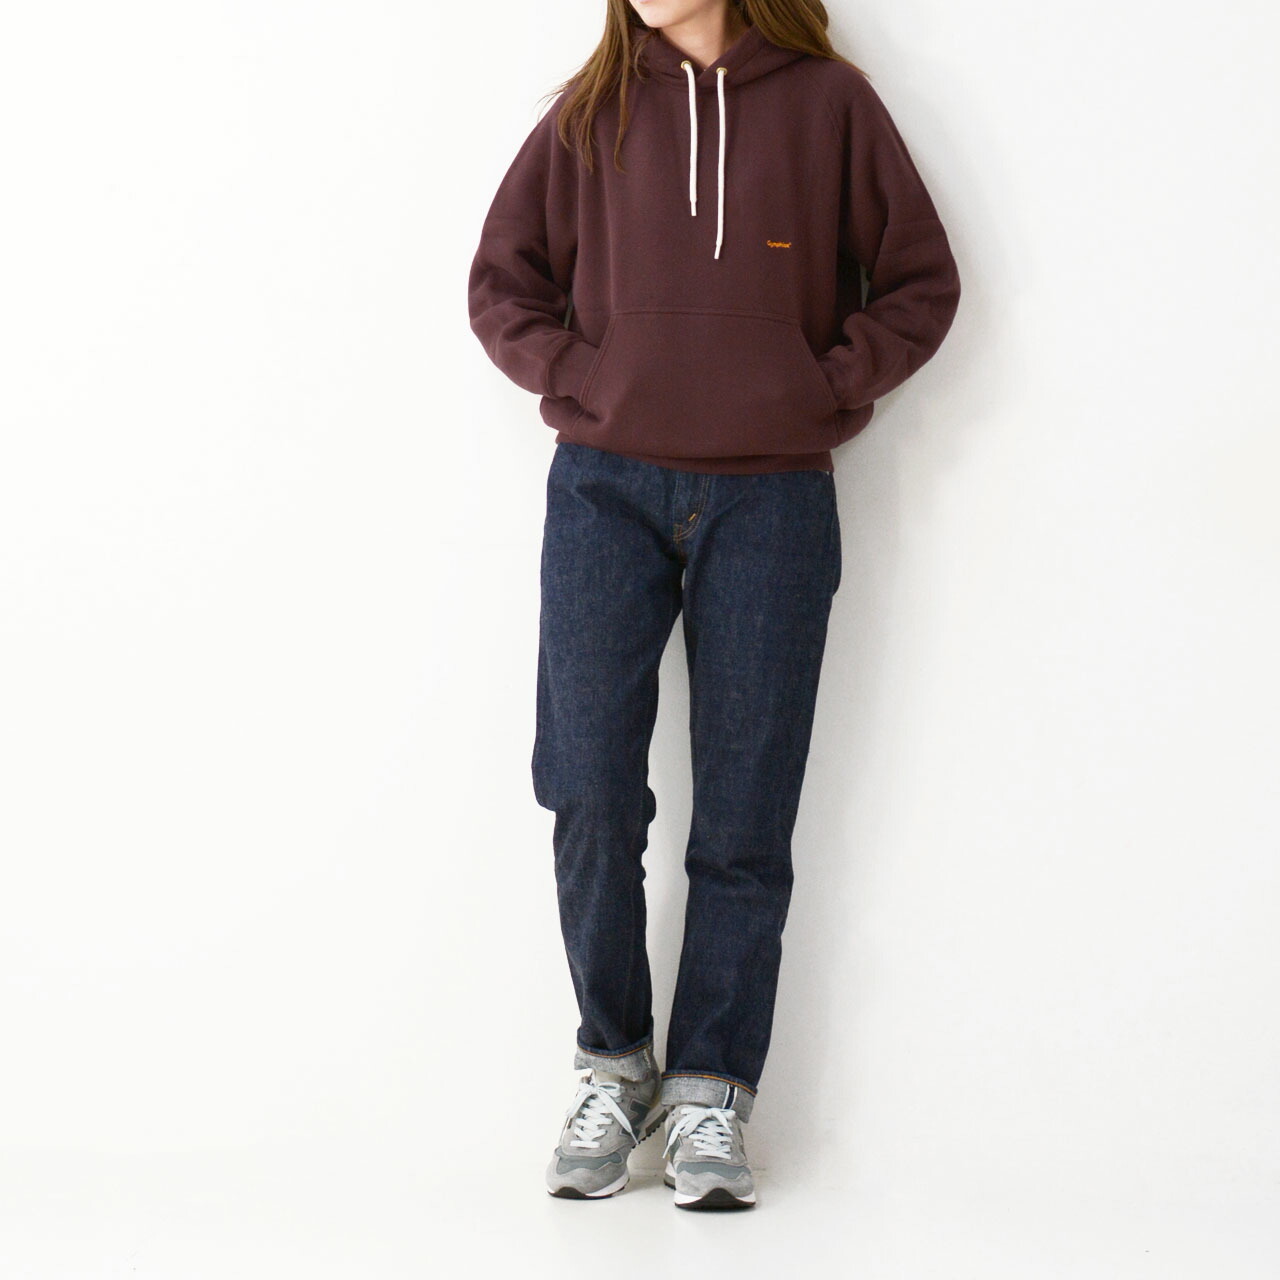 Gymphlex [ジムフレックス] SWING SLEEVE PULLOVER HOODIE [GY-C0002 ARB]_f0051306_13480184.jpg